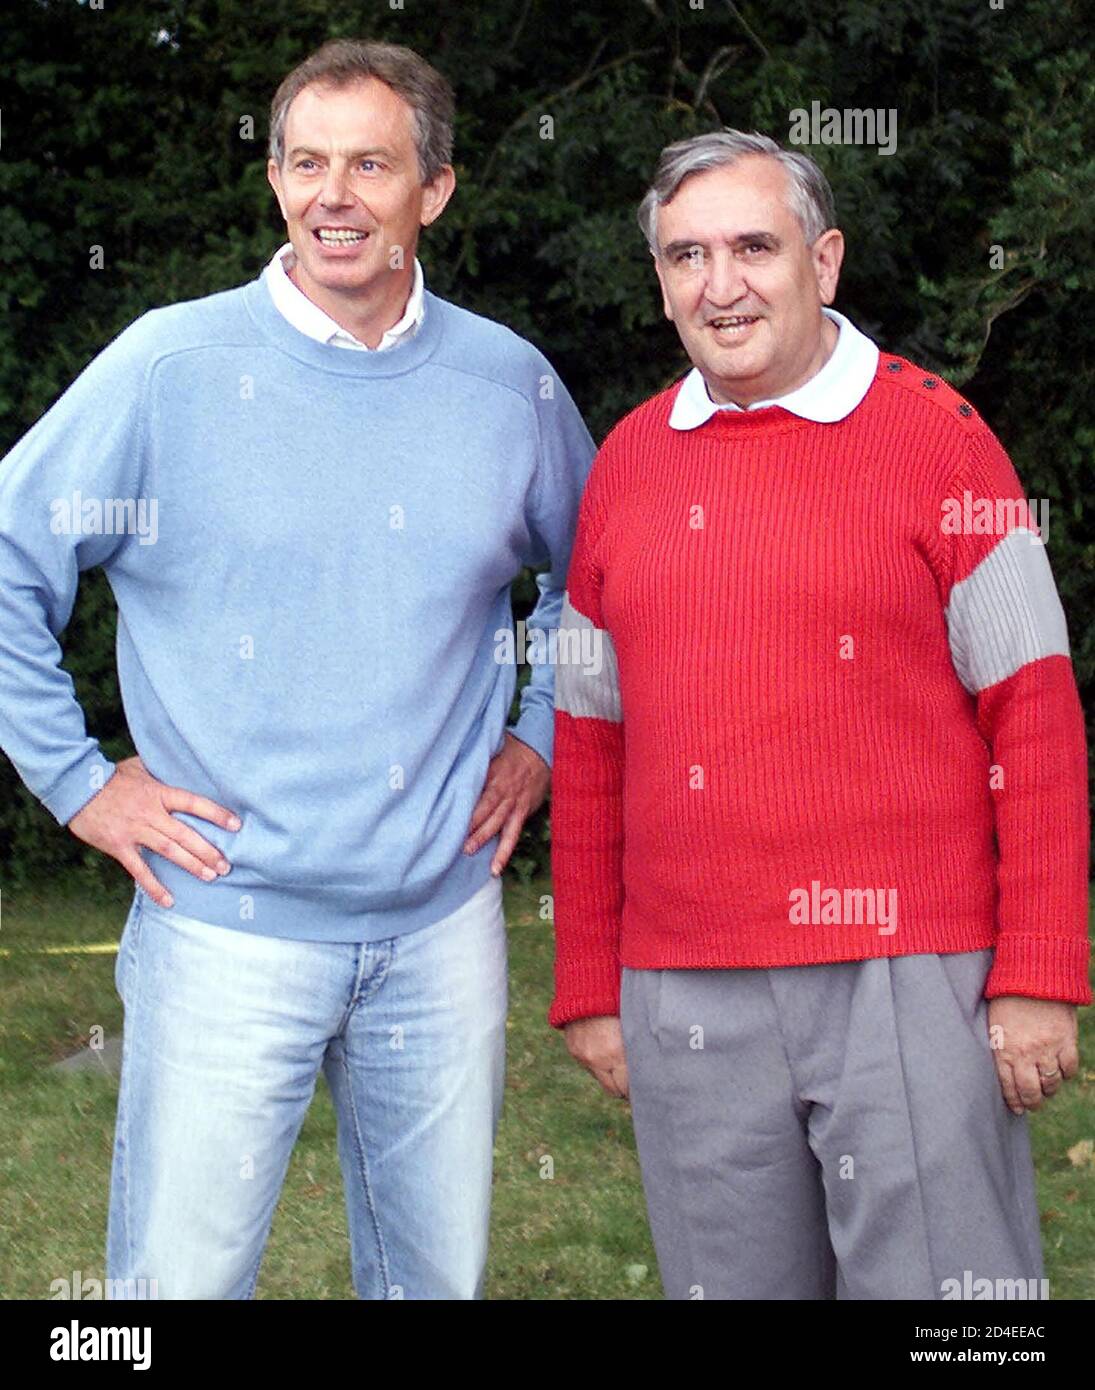 British prime Minister Tony Blair (L) poses with French prime Minister Jean-Pierre Raffarin after a private meeting in the castle of 'Lagrezette' in Caillac, southwestern France, August 12,2002. Blair is currently on holiday in the area. Stock Photo